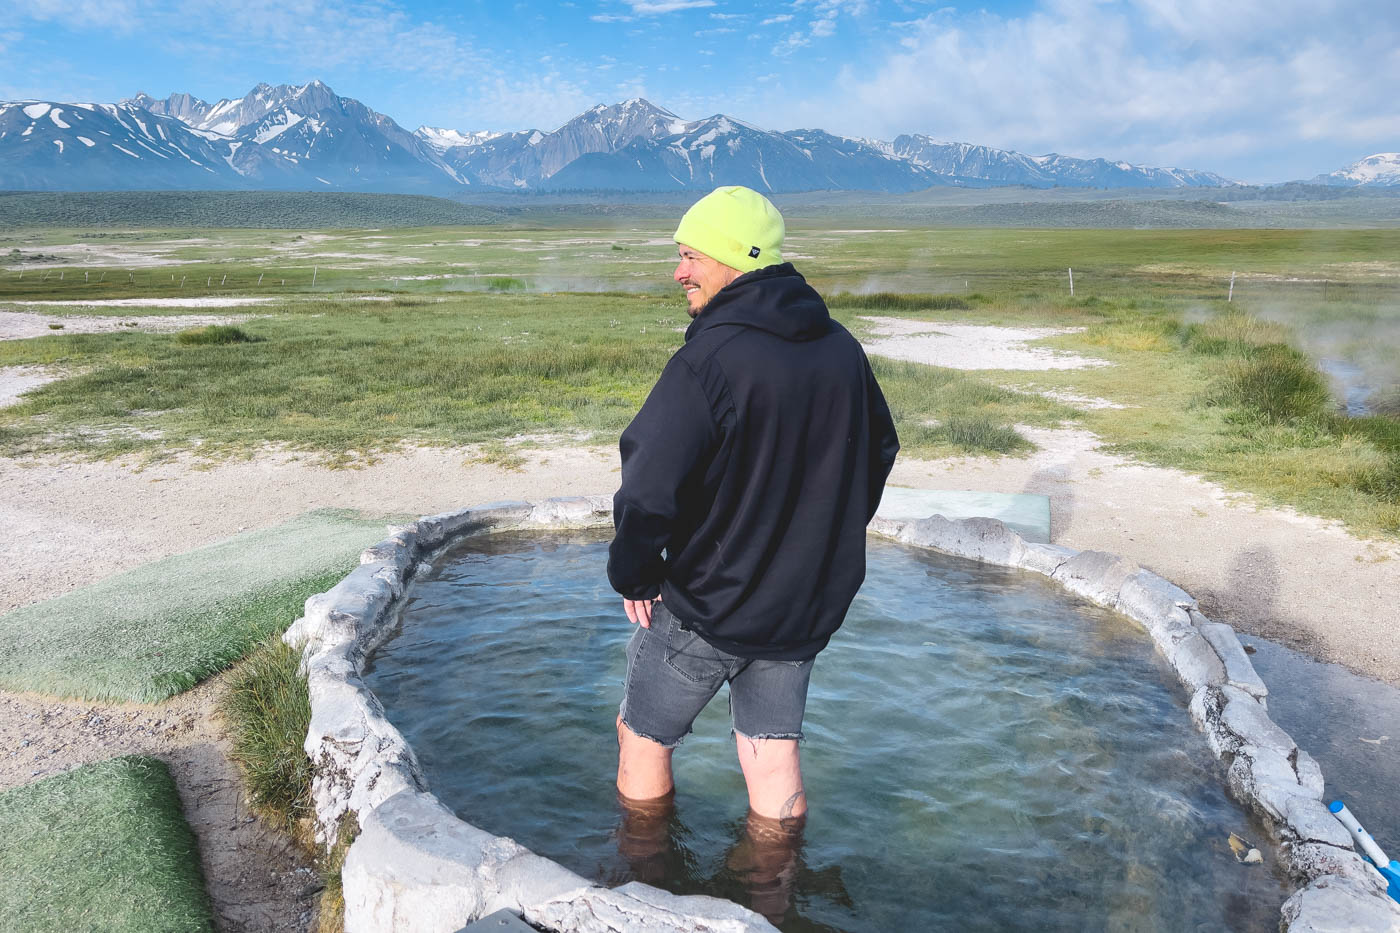 Garrett in shorts, a jumper and a bean standing in Hilltop Hot Spring with a mountain view on a sunny day.